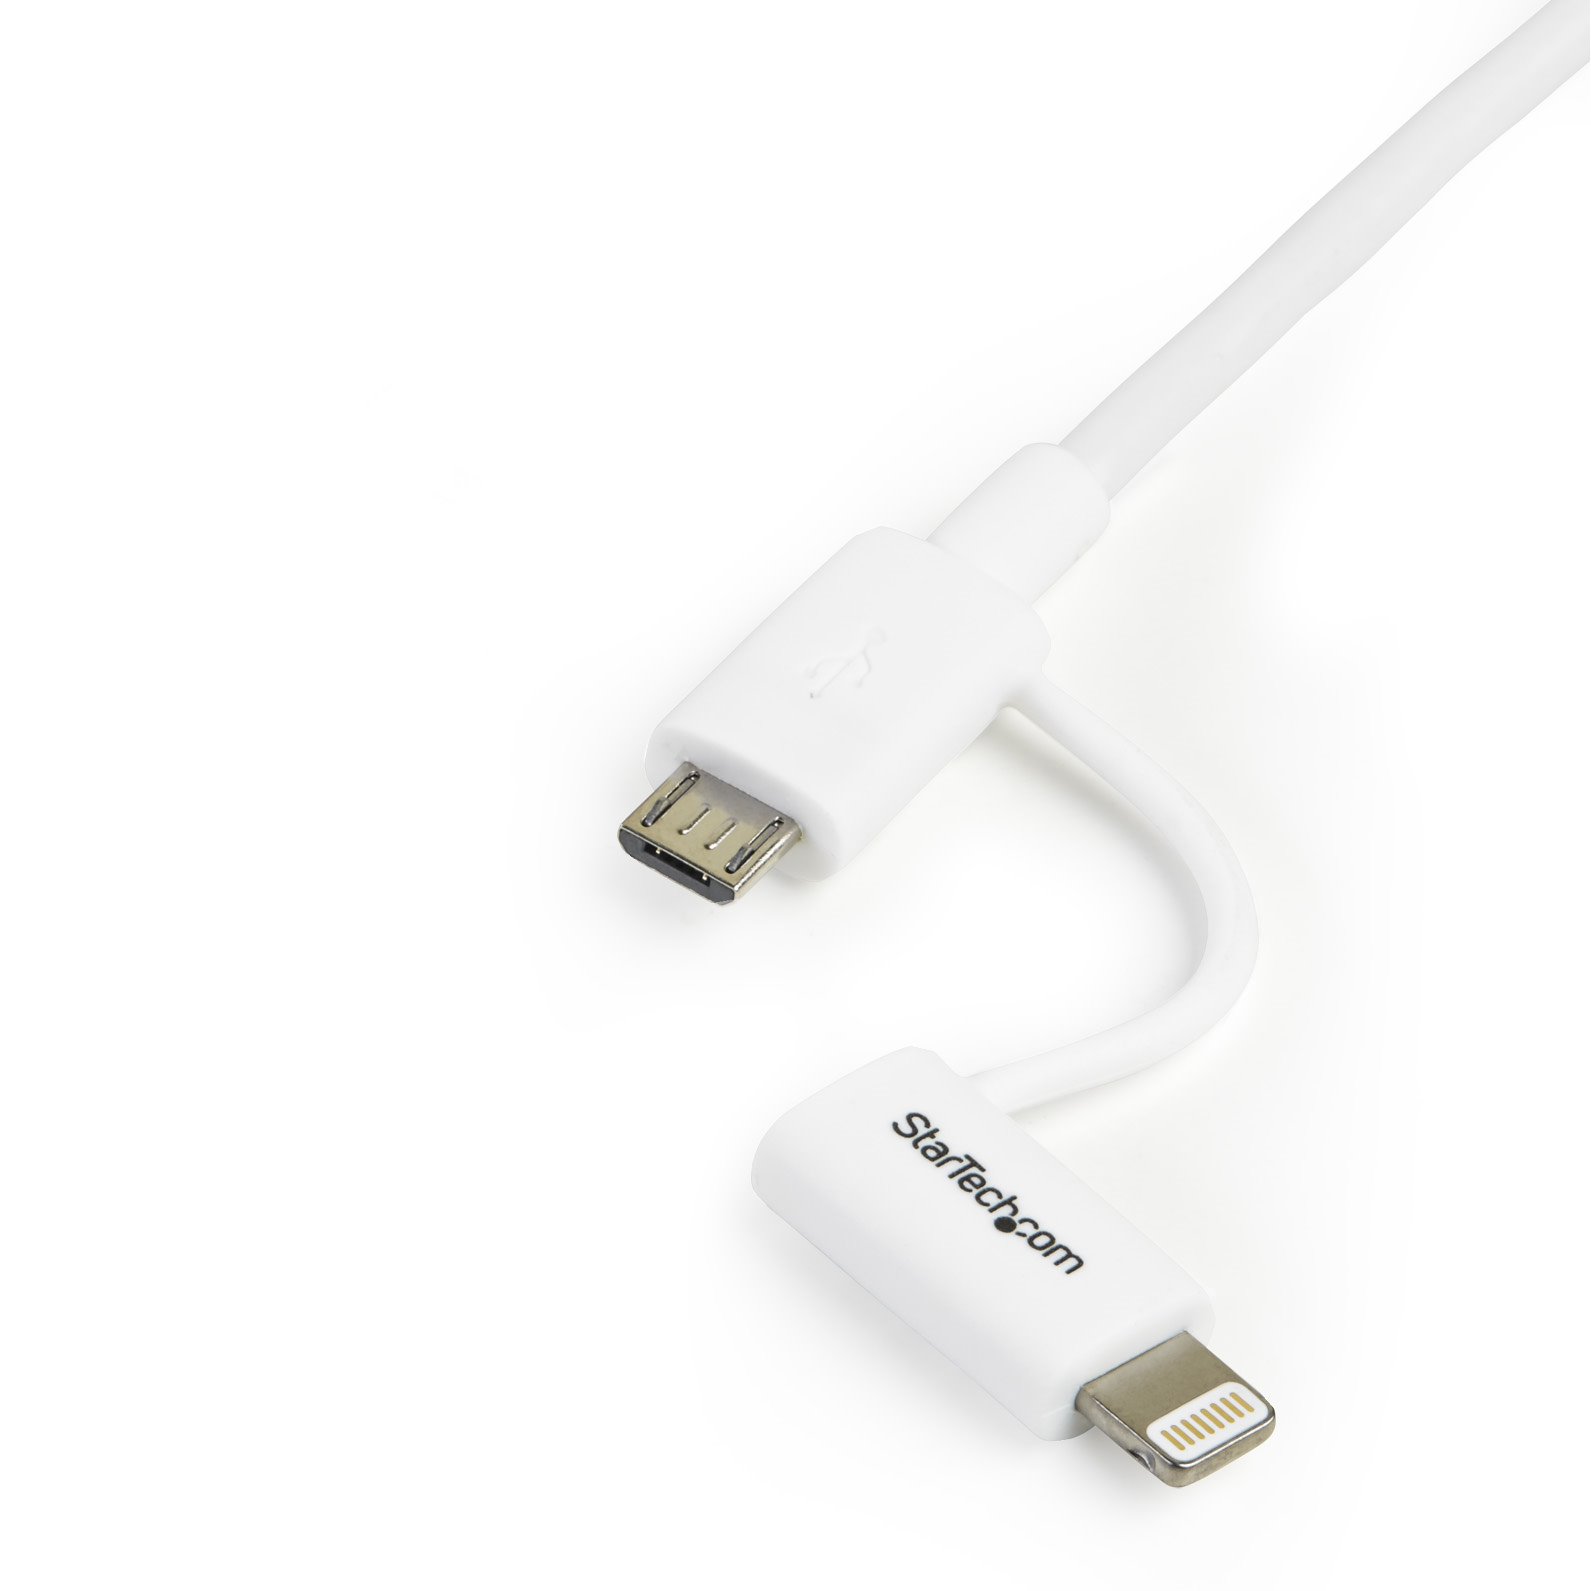 1m Lightning or Micro USB to USB Cable - Lightning Cables, Cables